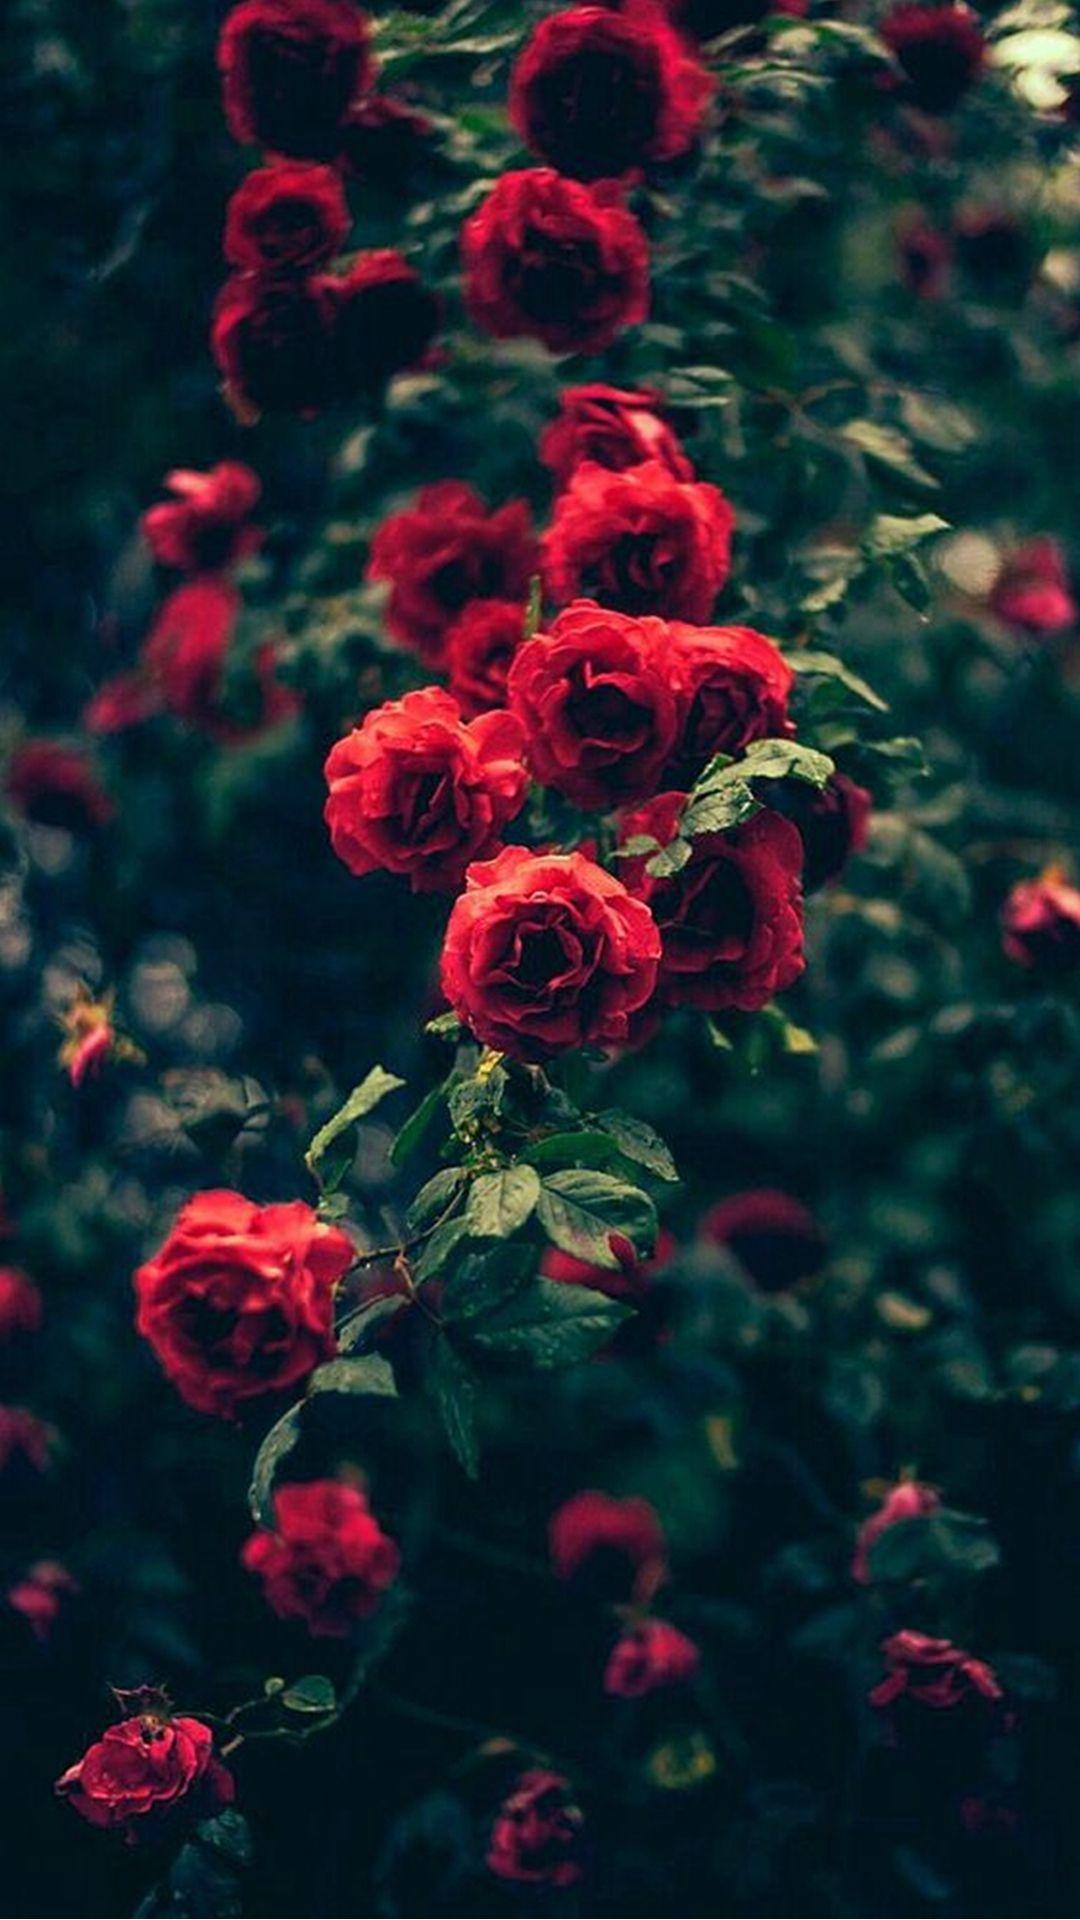 Rose iPhone Wallpaper Free Rose iPhone Background